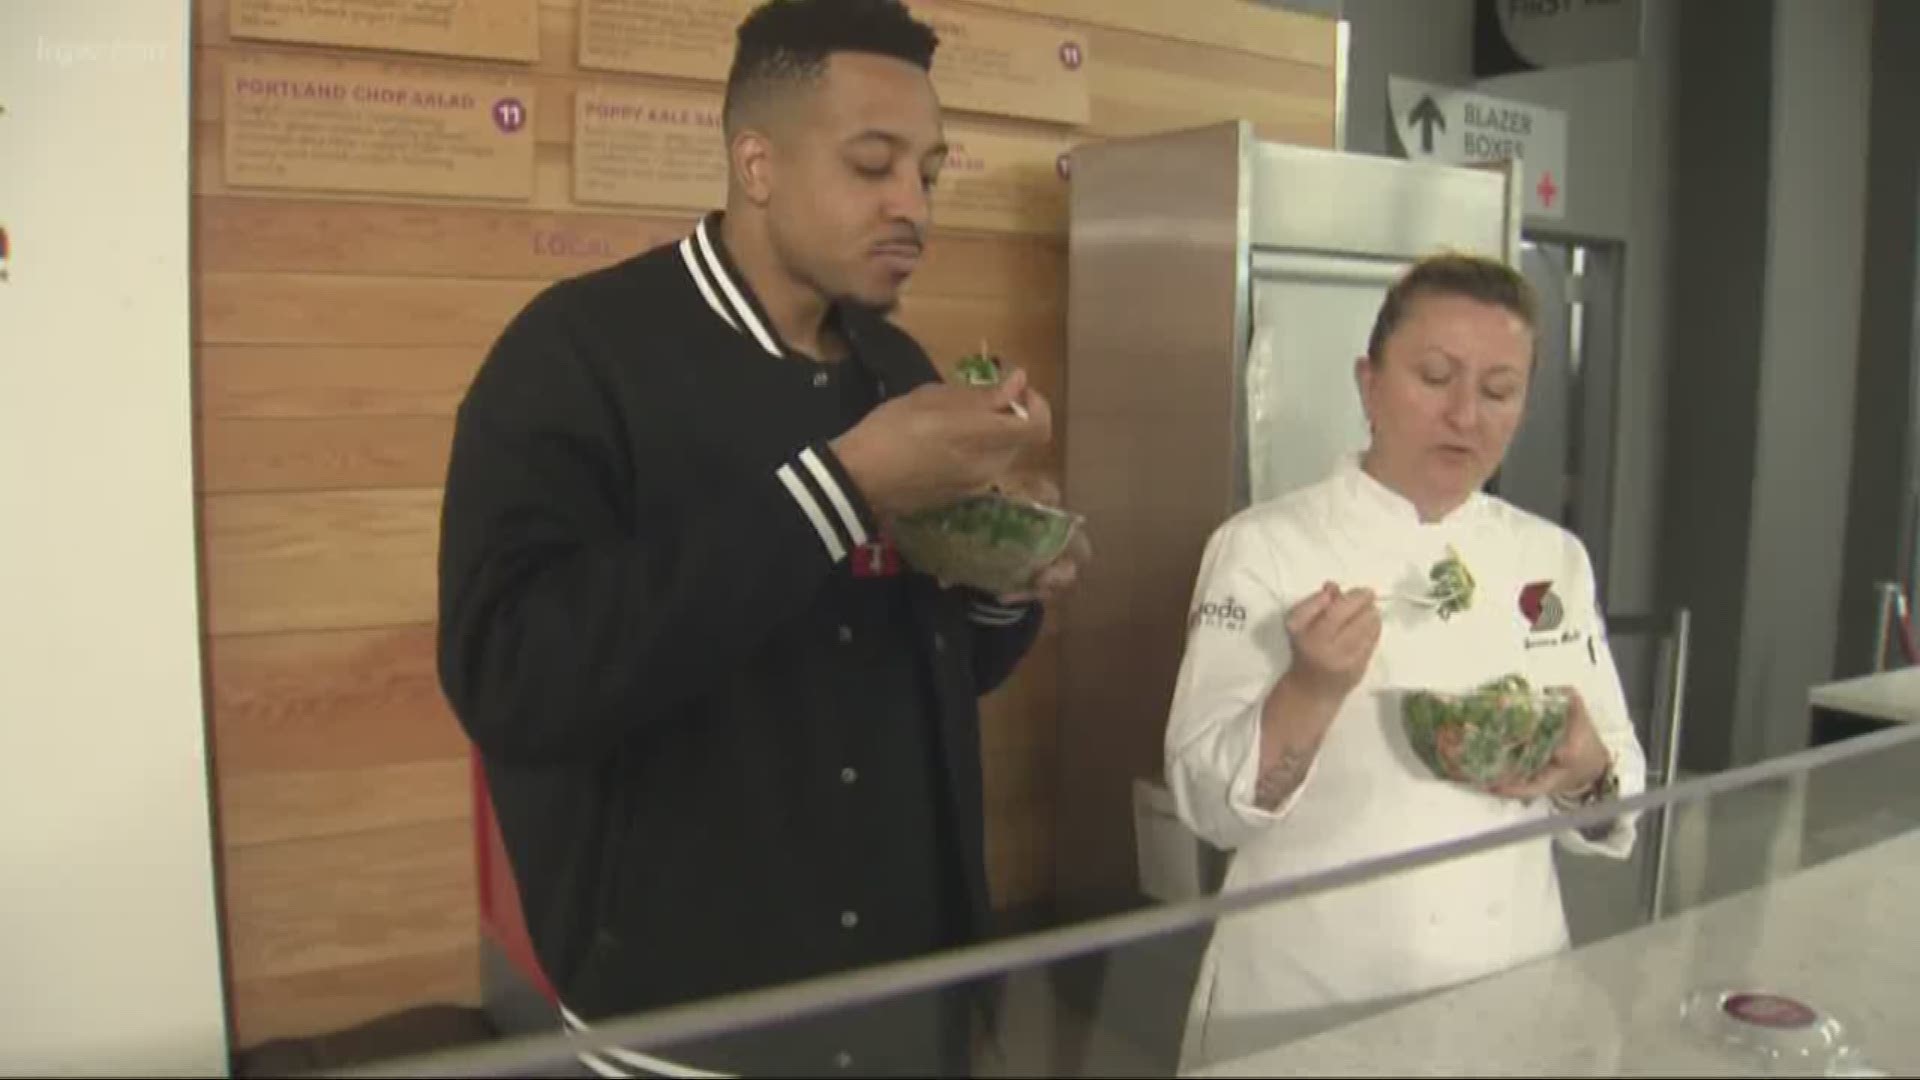 CJ McCollum promotes healthy eating during National Nutrition Month